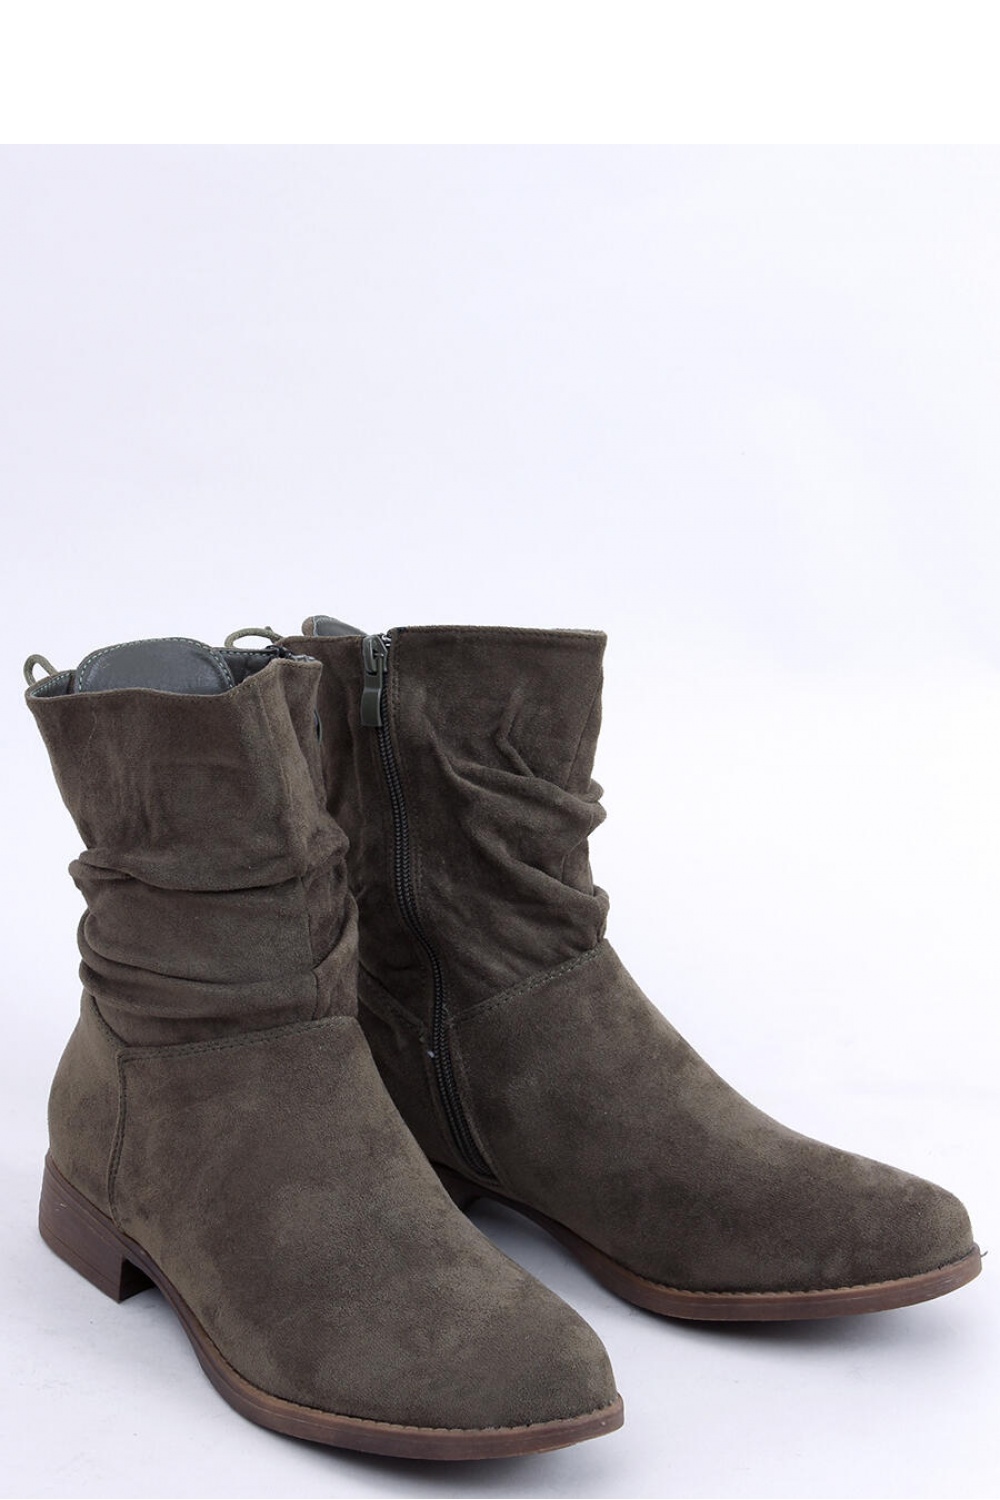  Boots model 188106 Inello  green